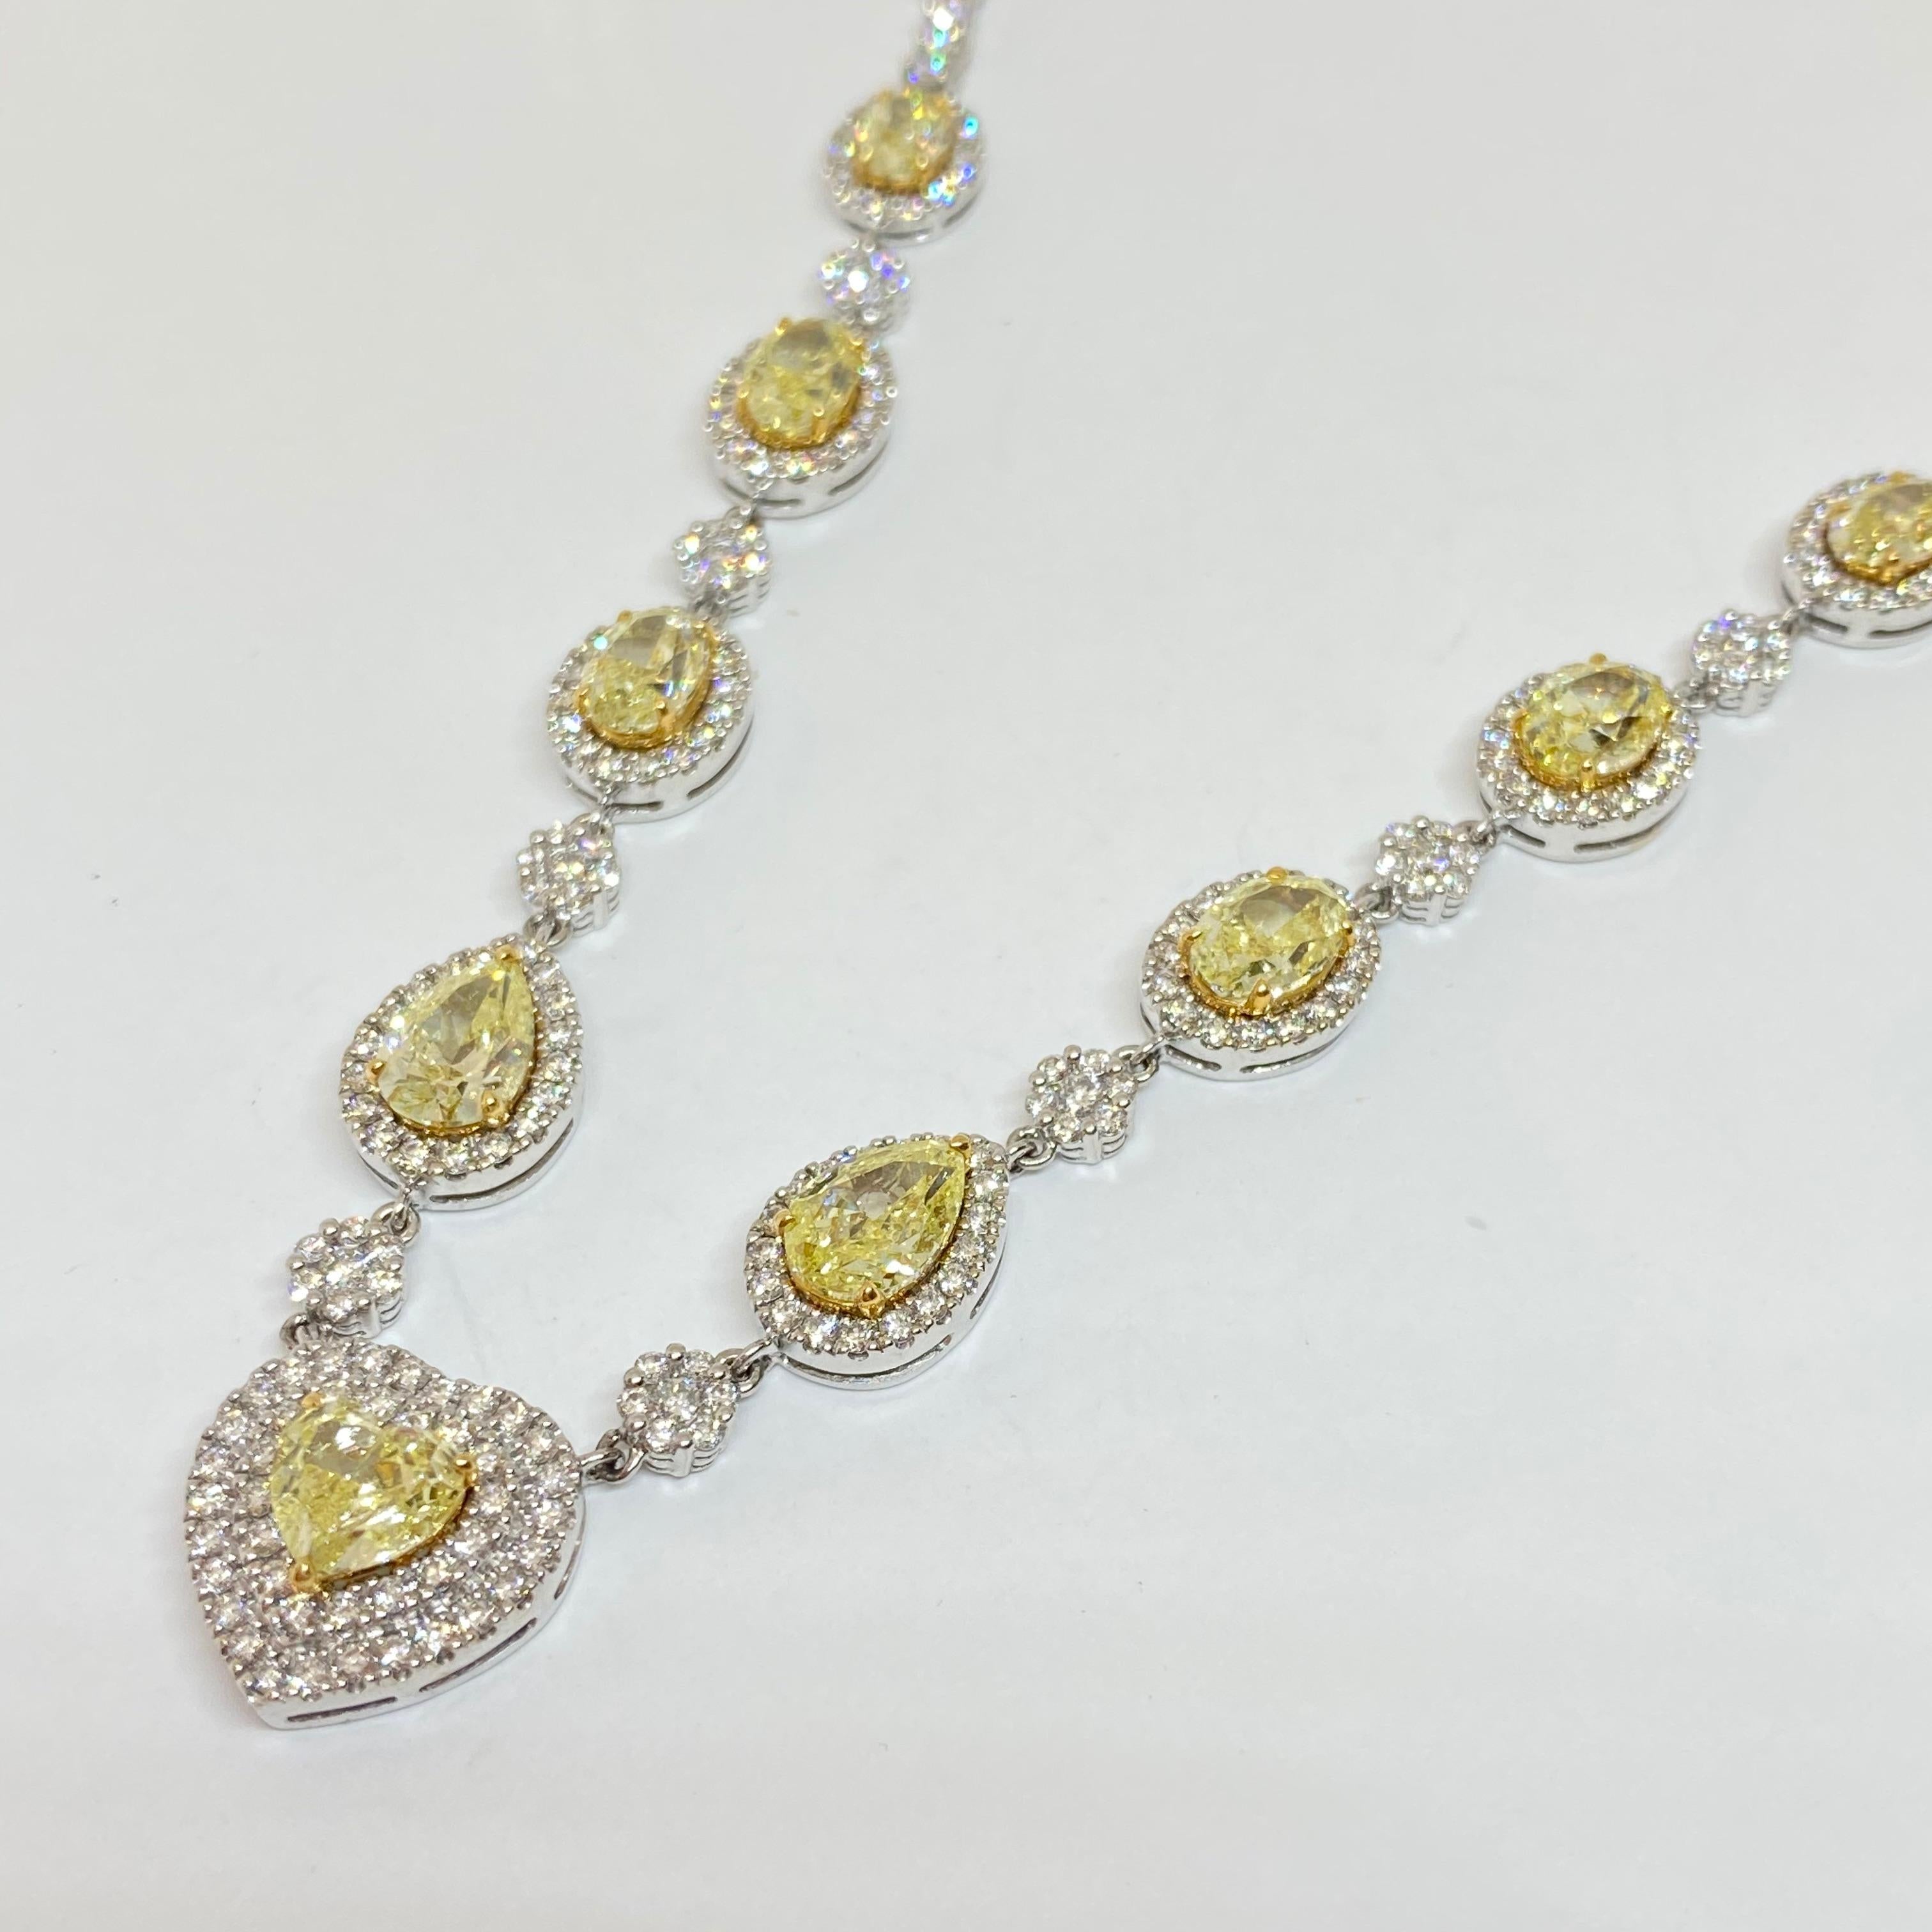 This one-of-a-kind diamond riviera necklace features fancy yellow heart, pear and oval shape diamonds surrounded by white diamond halos. The necklace is designed in 18 karat white and yellow gold. The necklace measures 17